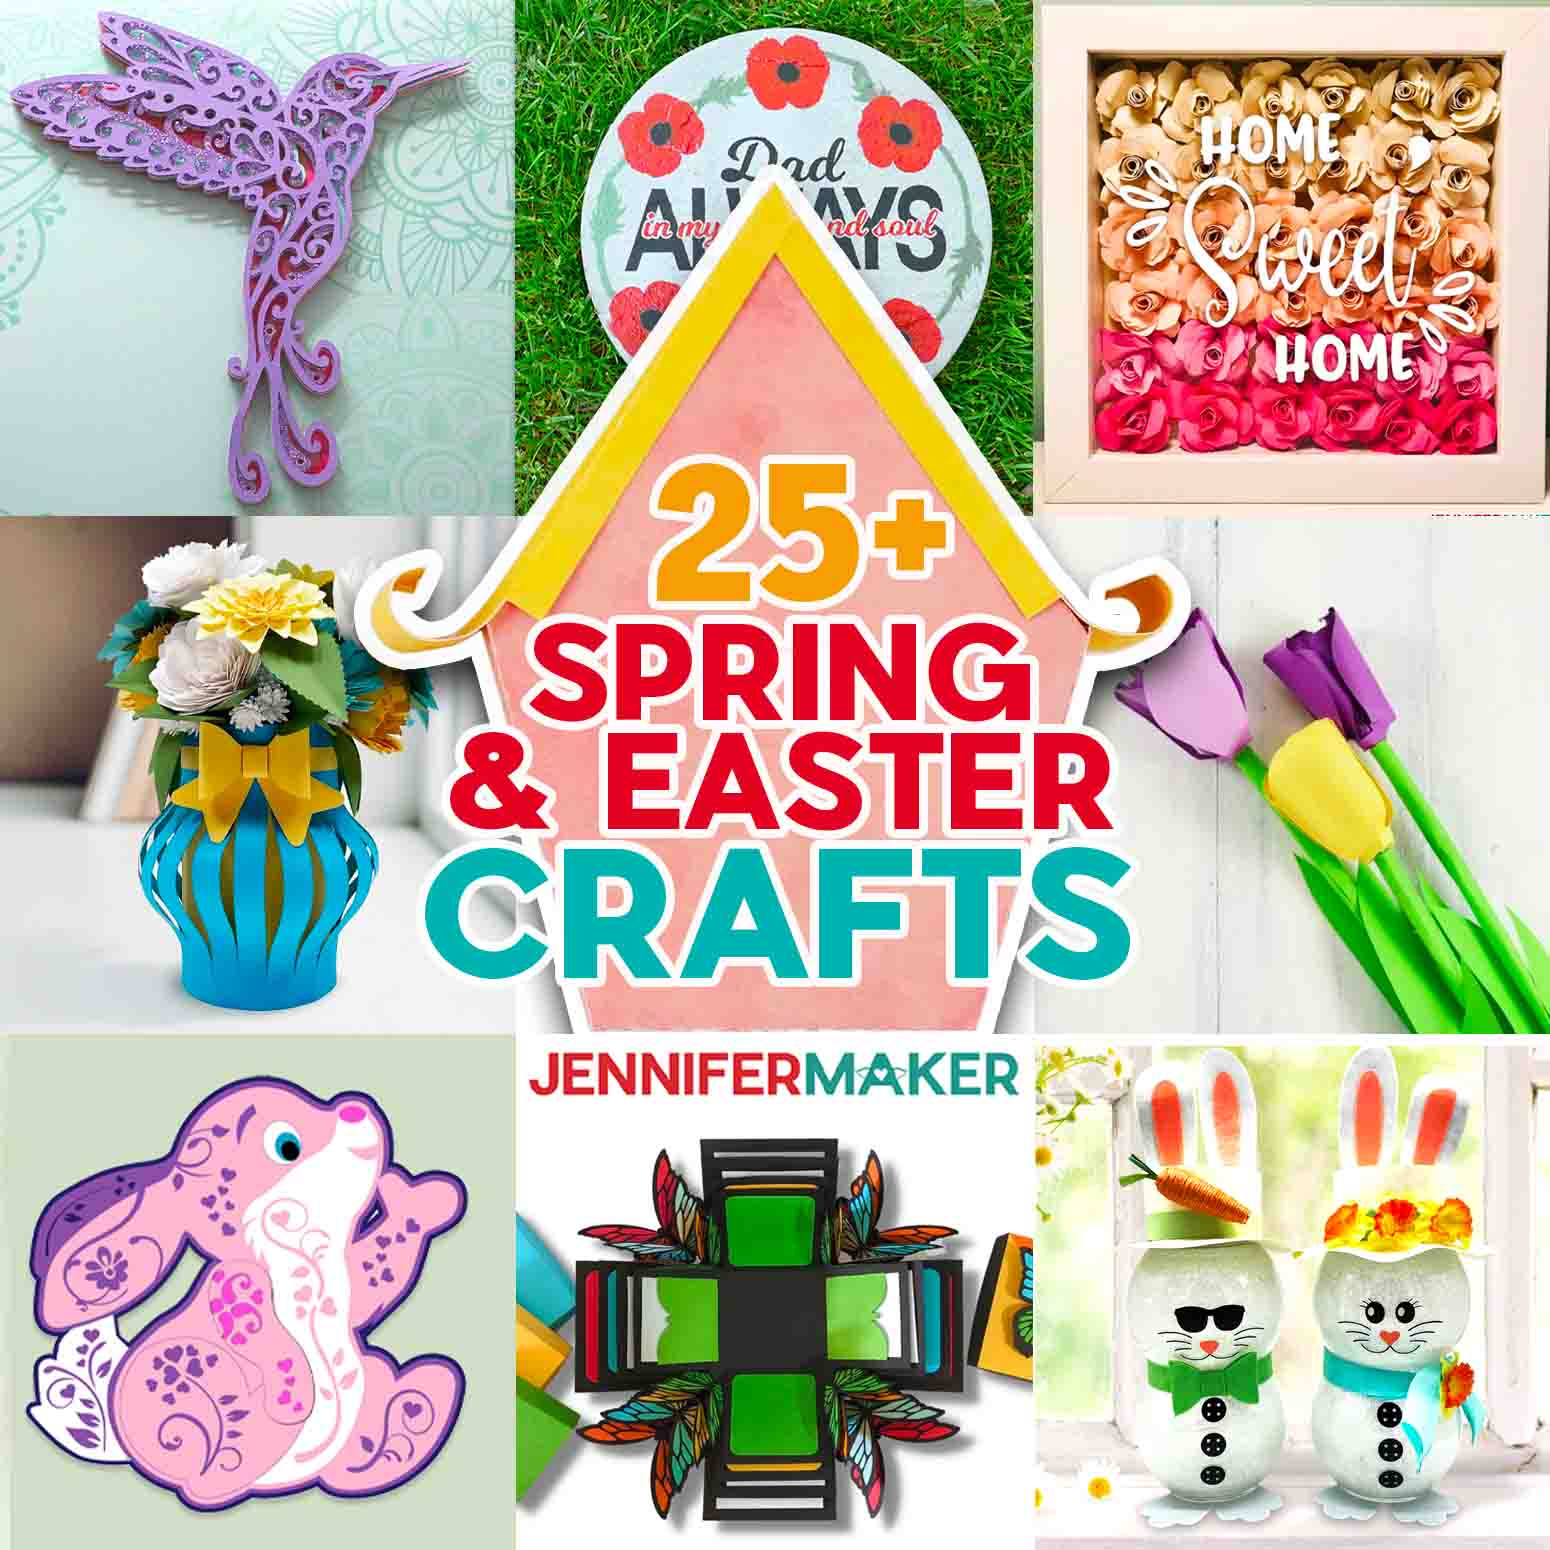 25+ Spring and Easter Crafts for you to make with Jennifer Maker's blog post!